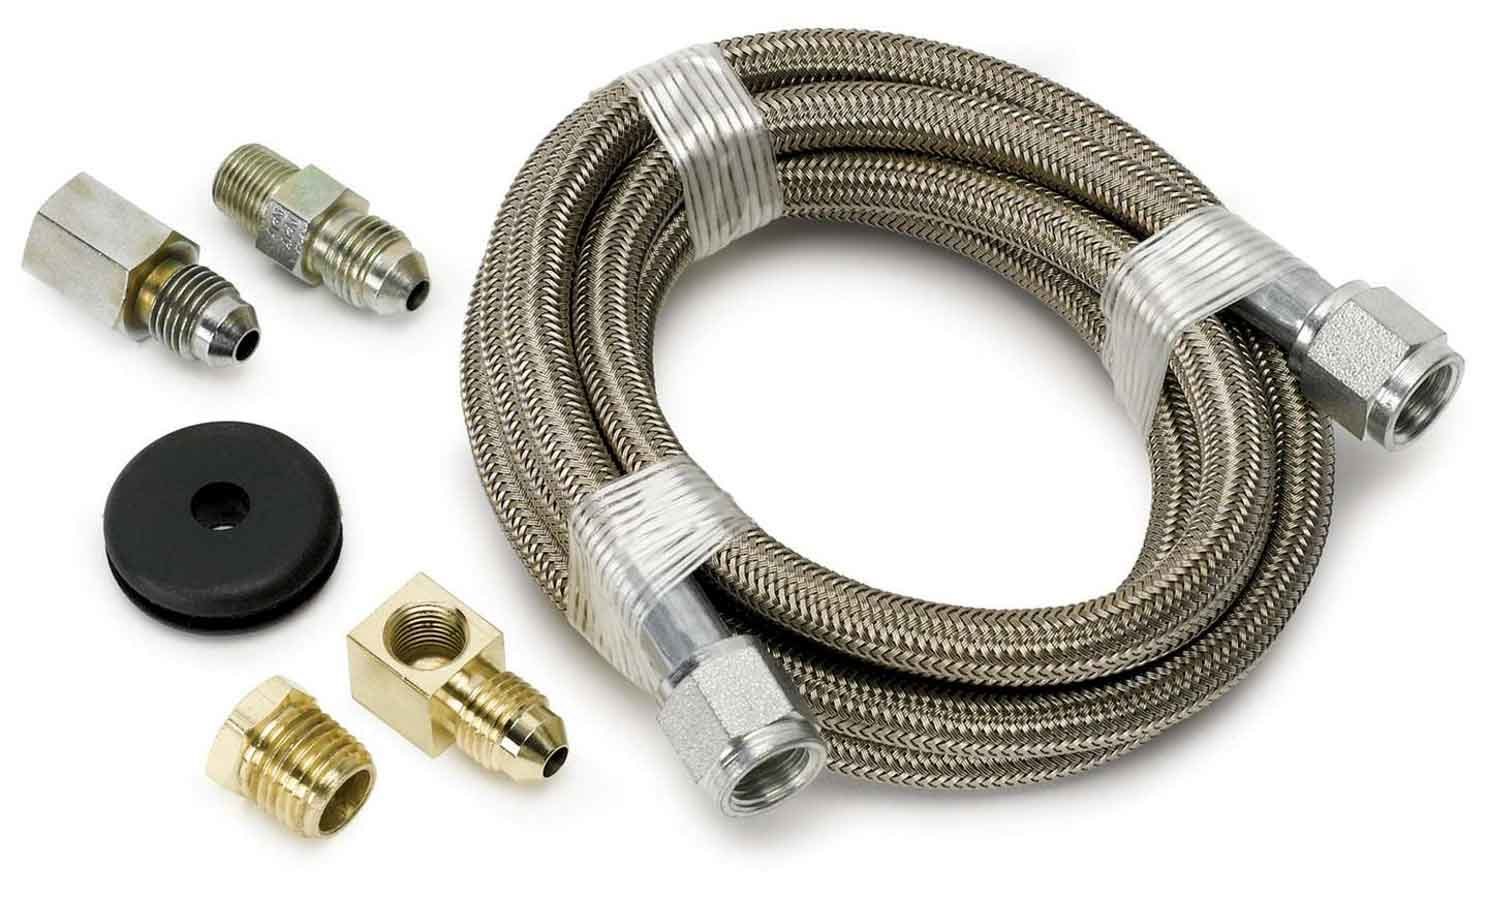 Auto Meter Gauge Line Kit, 4 AN, 6 ft, 4 AN Female to 4 AN Female, Fittings Included, Braided Stainless, Mechanical Pressure Gau